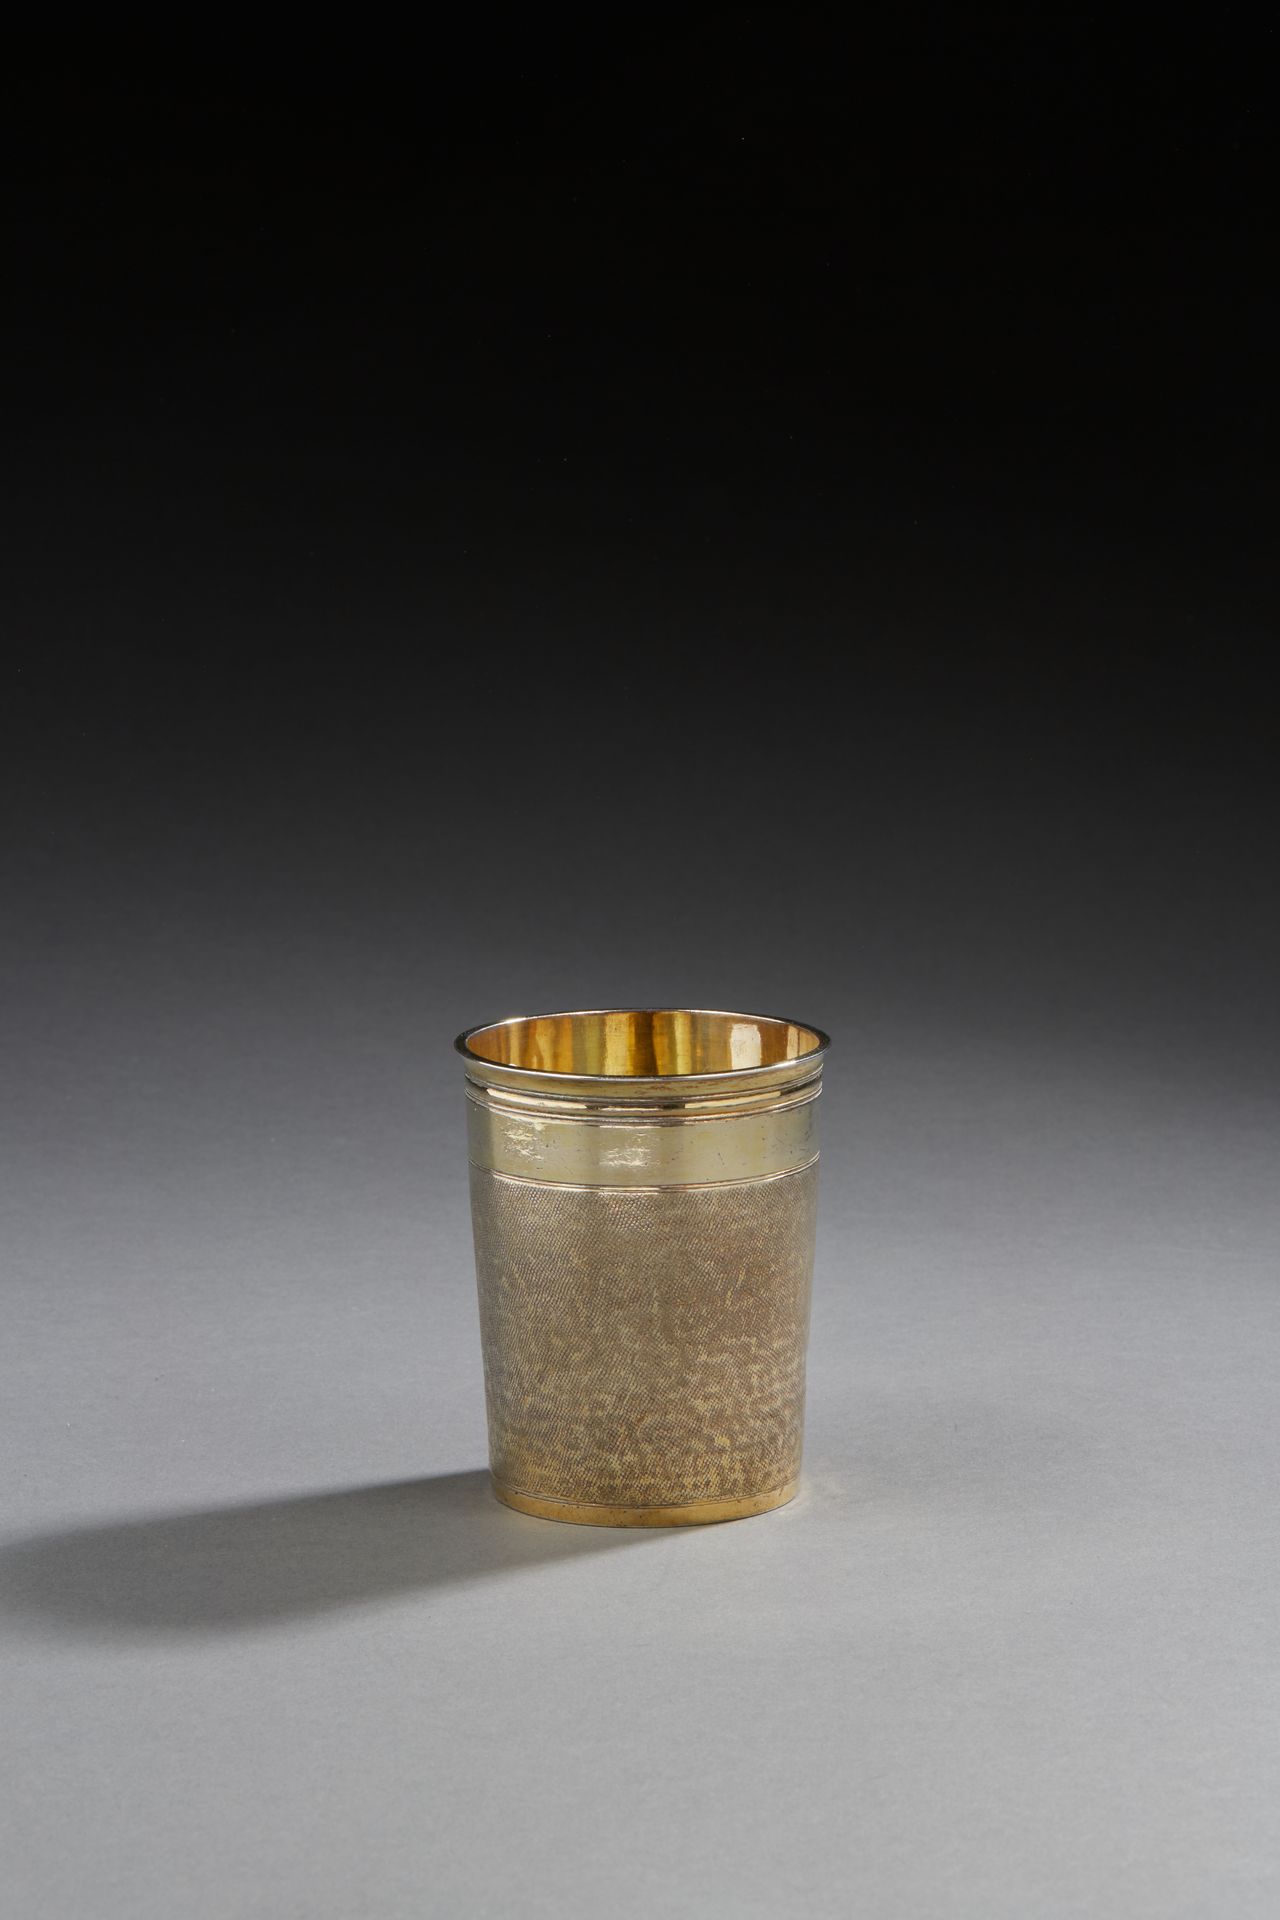 Null STRASBOURG END OF THE 17th CENTURY
Magistrate's cup in vermeil with a "shar&hellip;